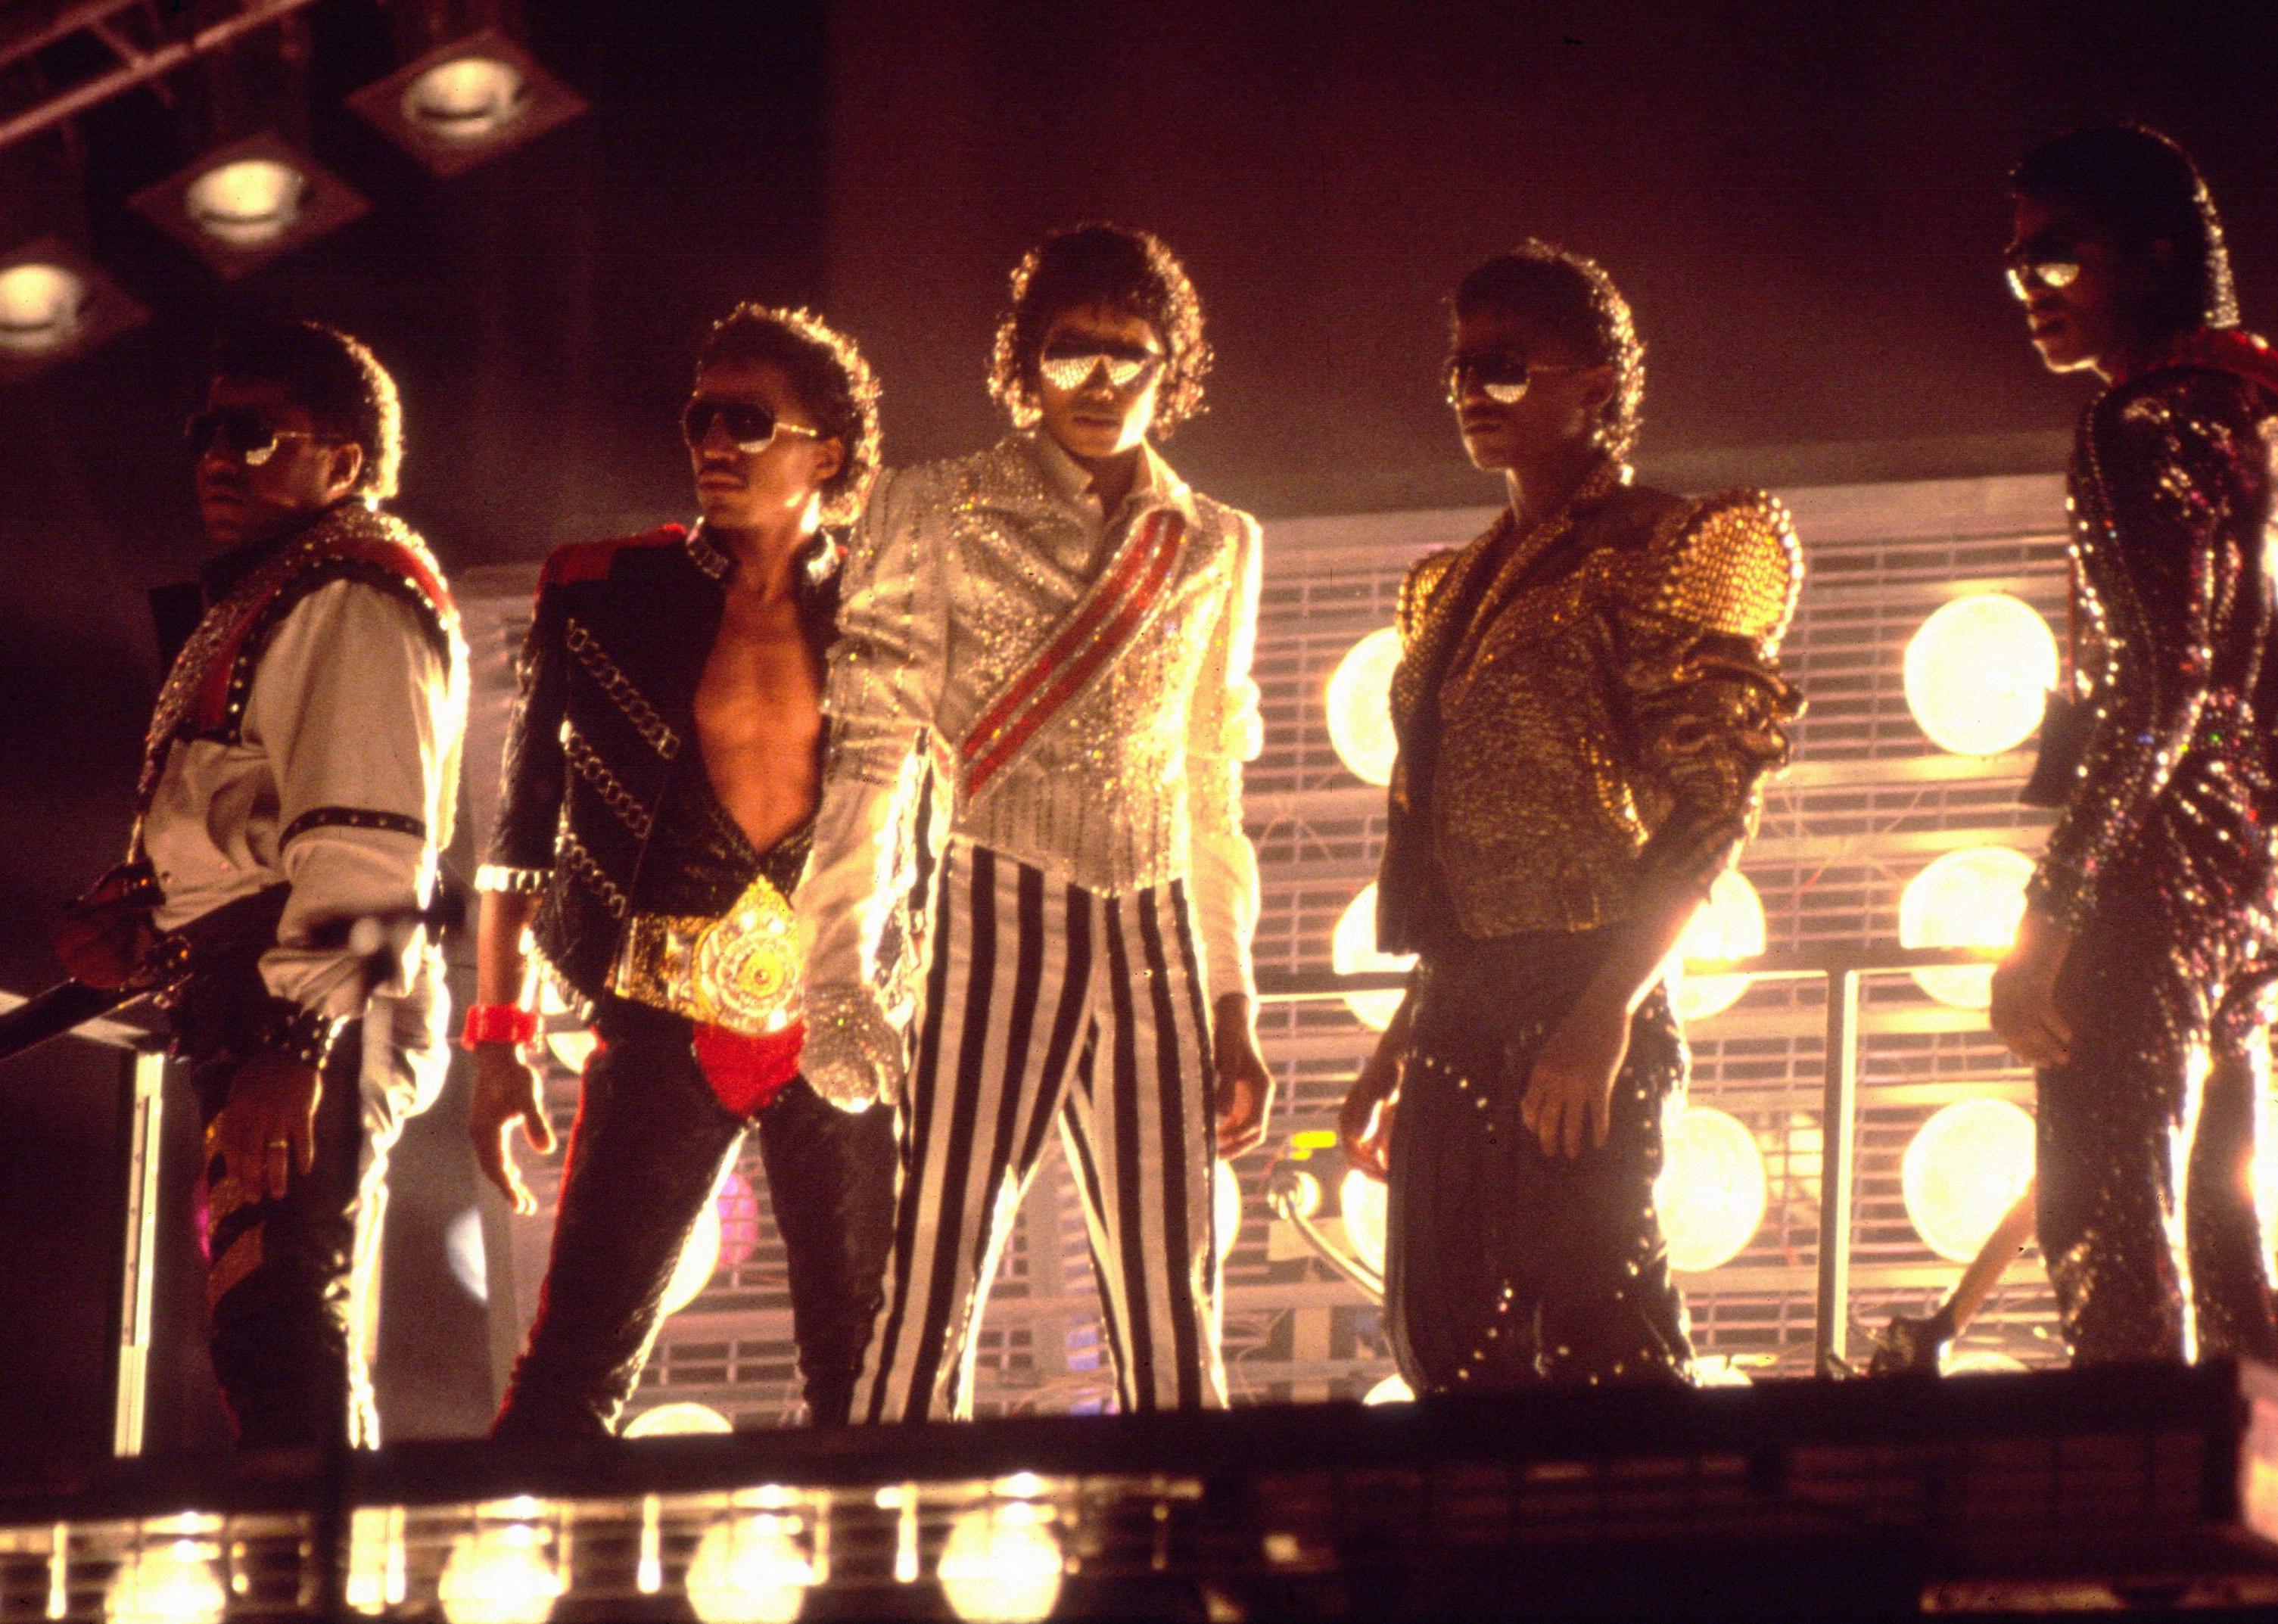 Tito, Marlon, Michael, Randy and Jermaine Jackson performing on stage.